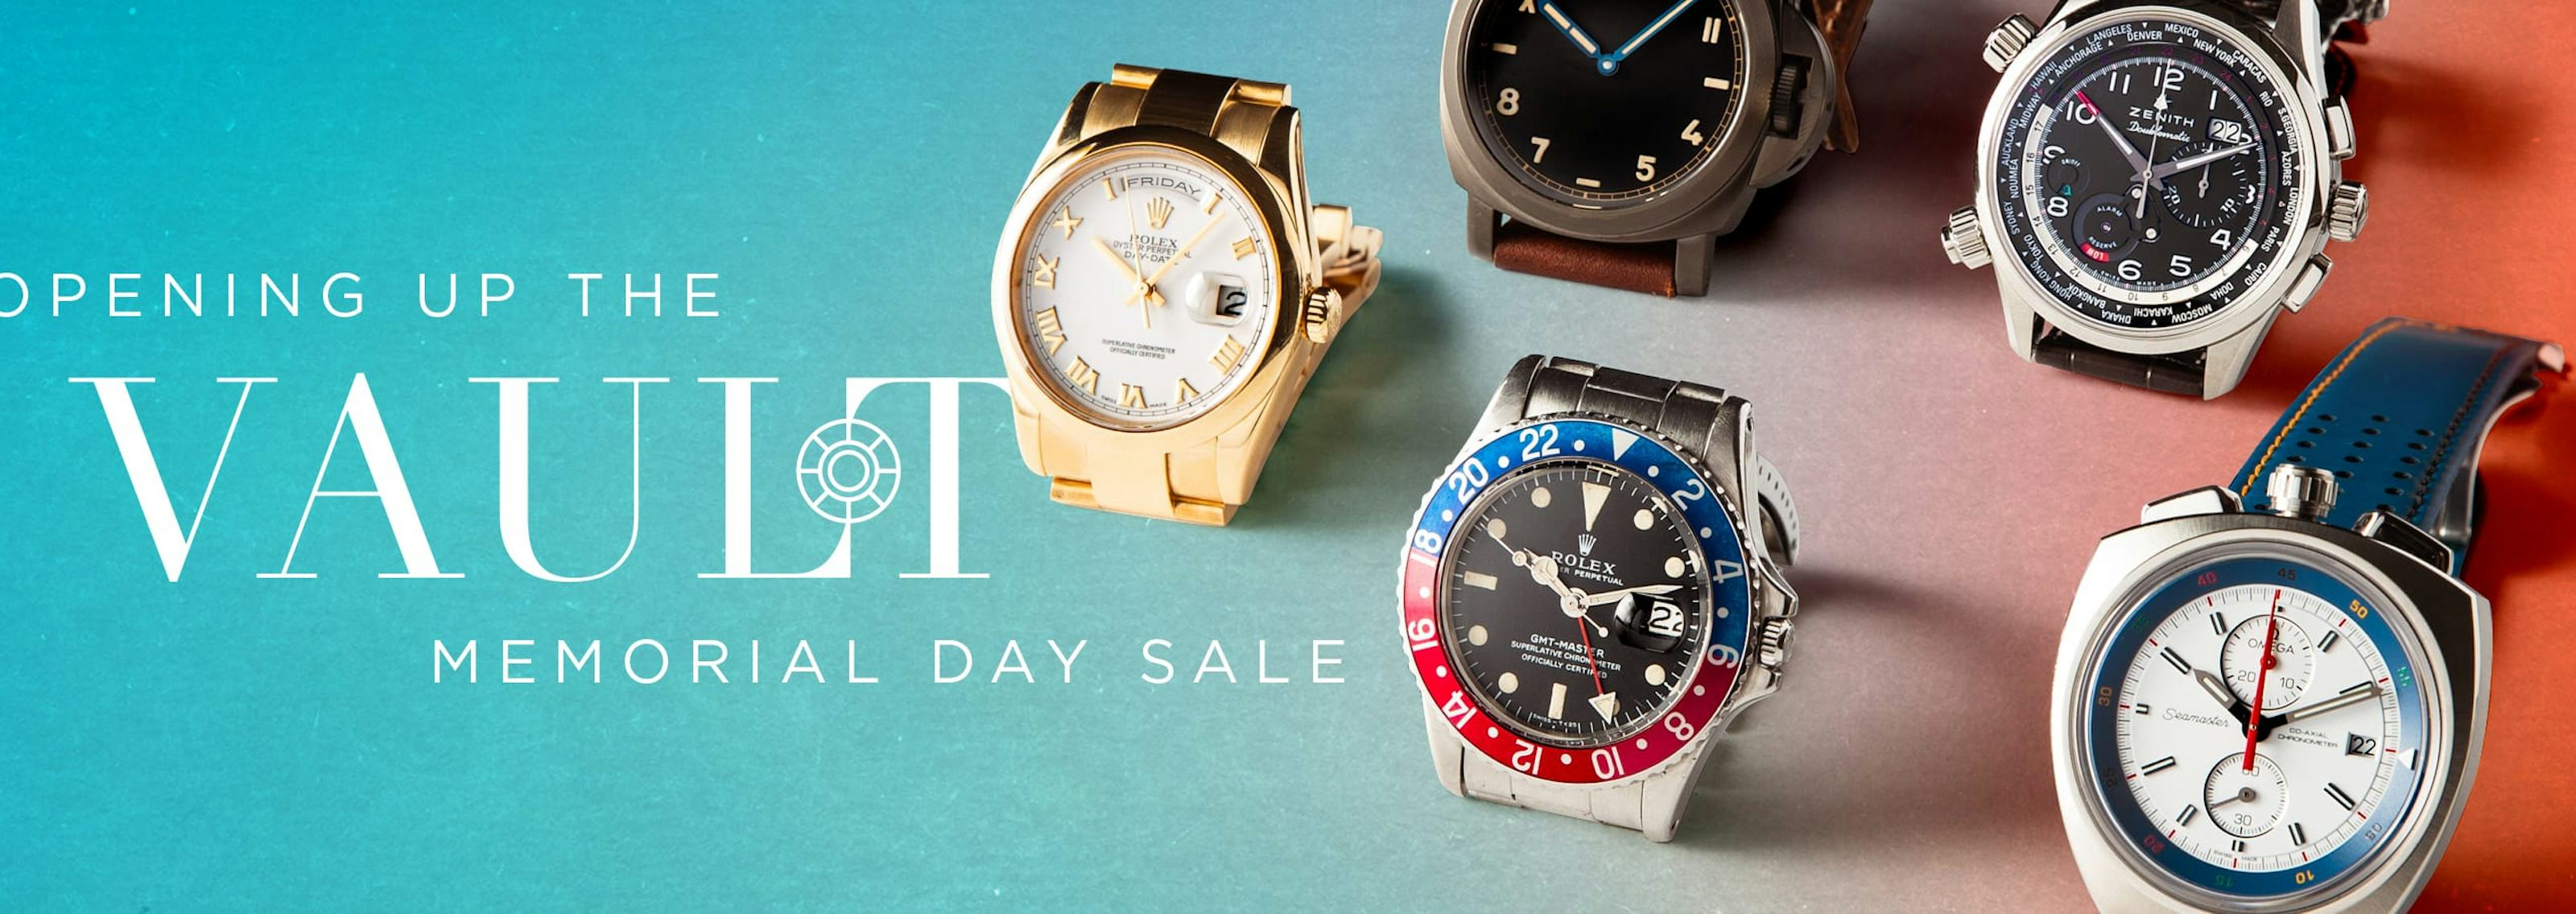 The Vault Remains Open: Sale ending this Friday, May 29th